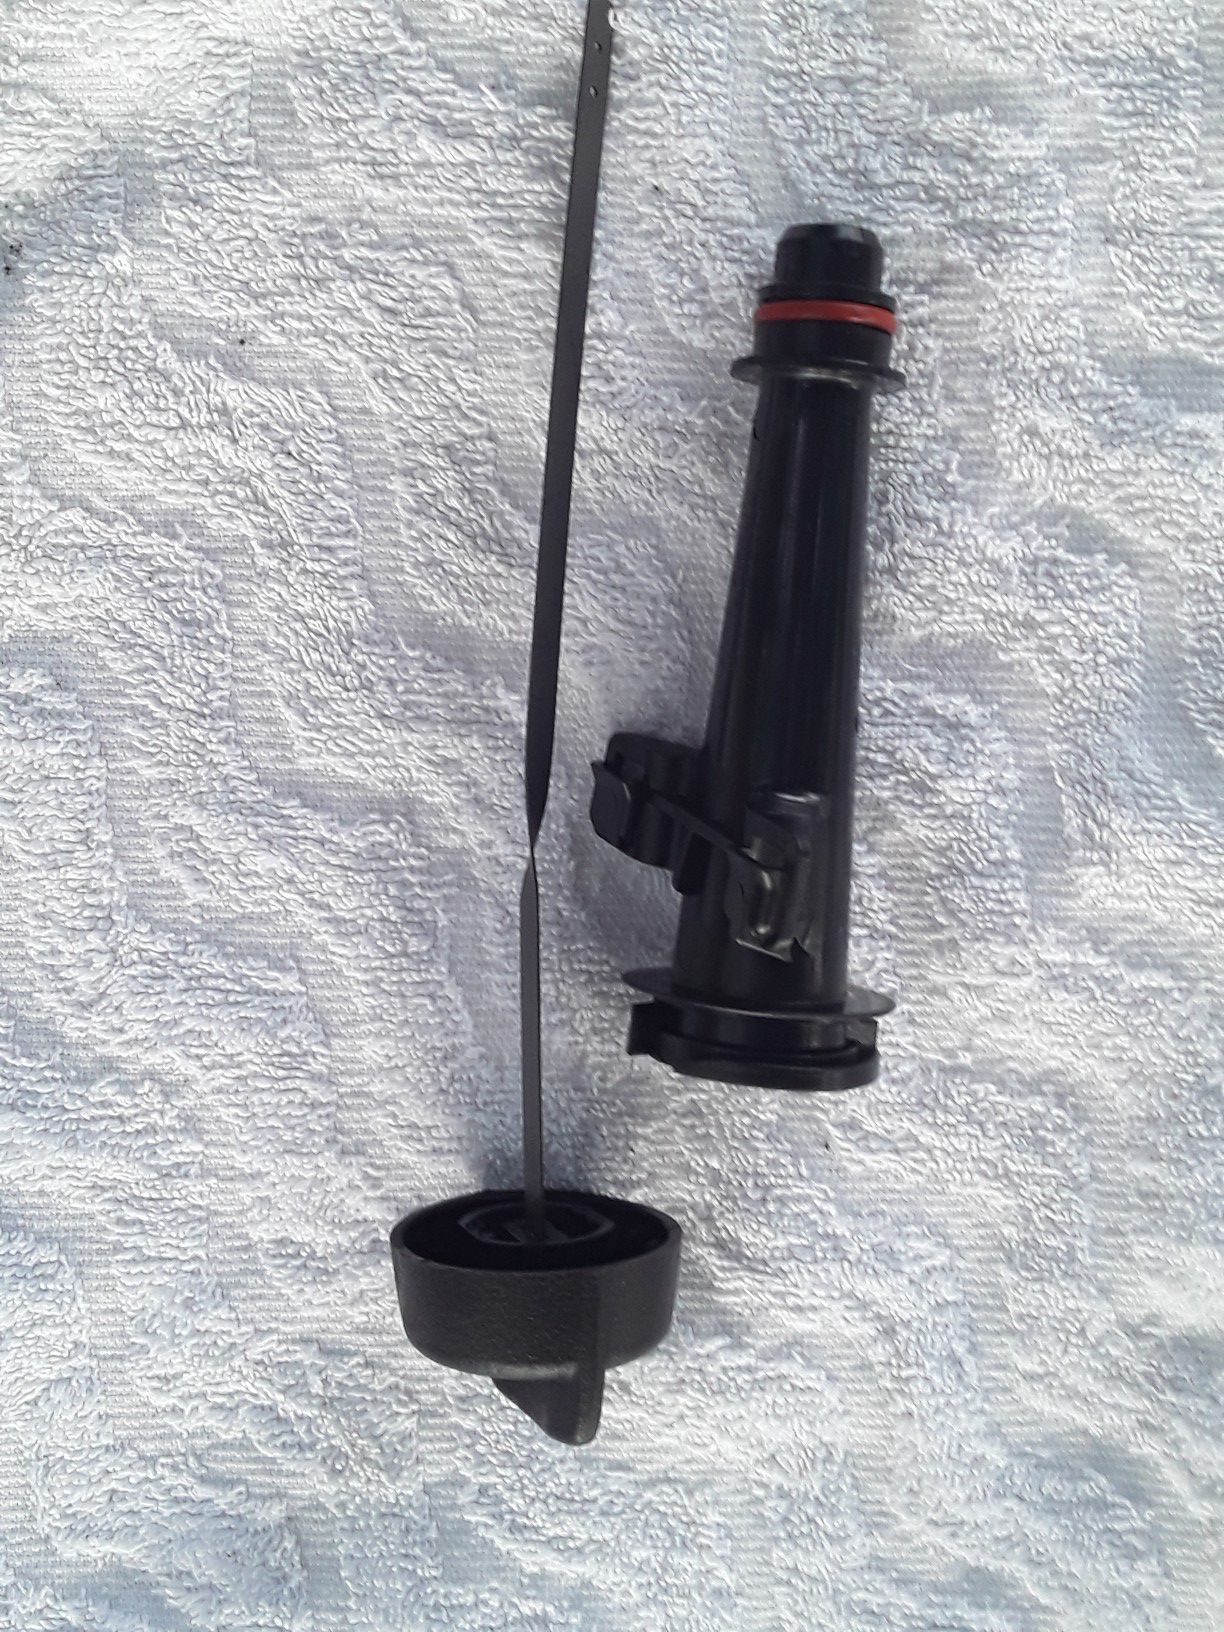 Briggs and Stratton 550ex Lawn Mower Oil Dipstick with Housing and Gaskets